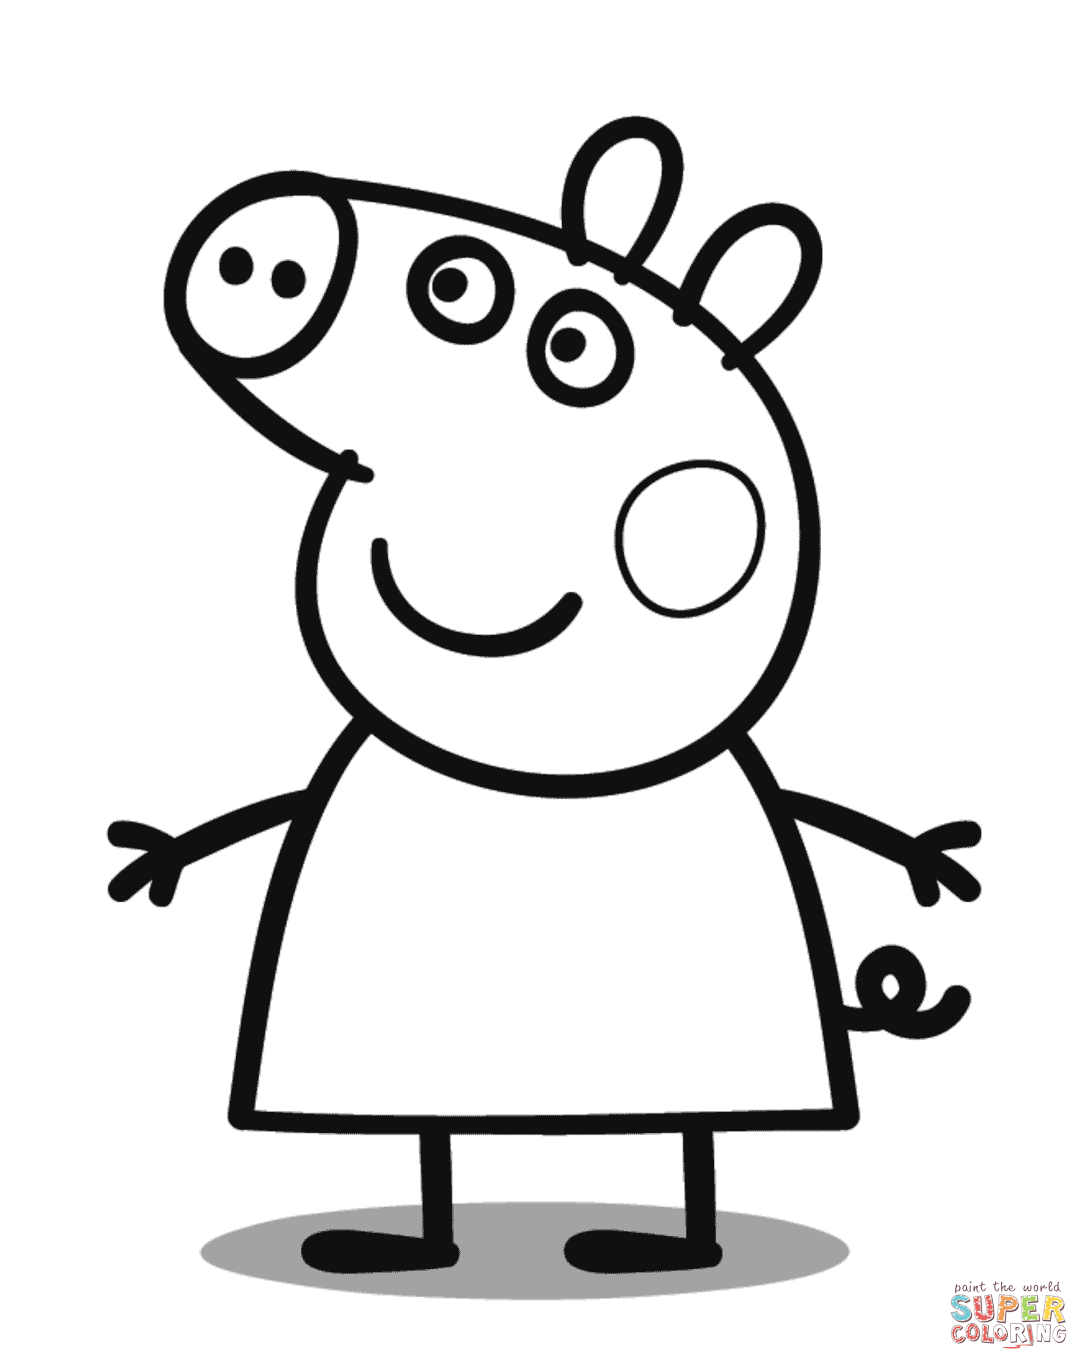 Peppa pig coloring page free printable coloring pages